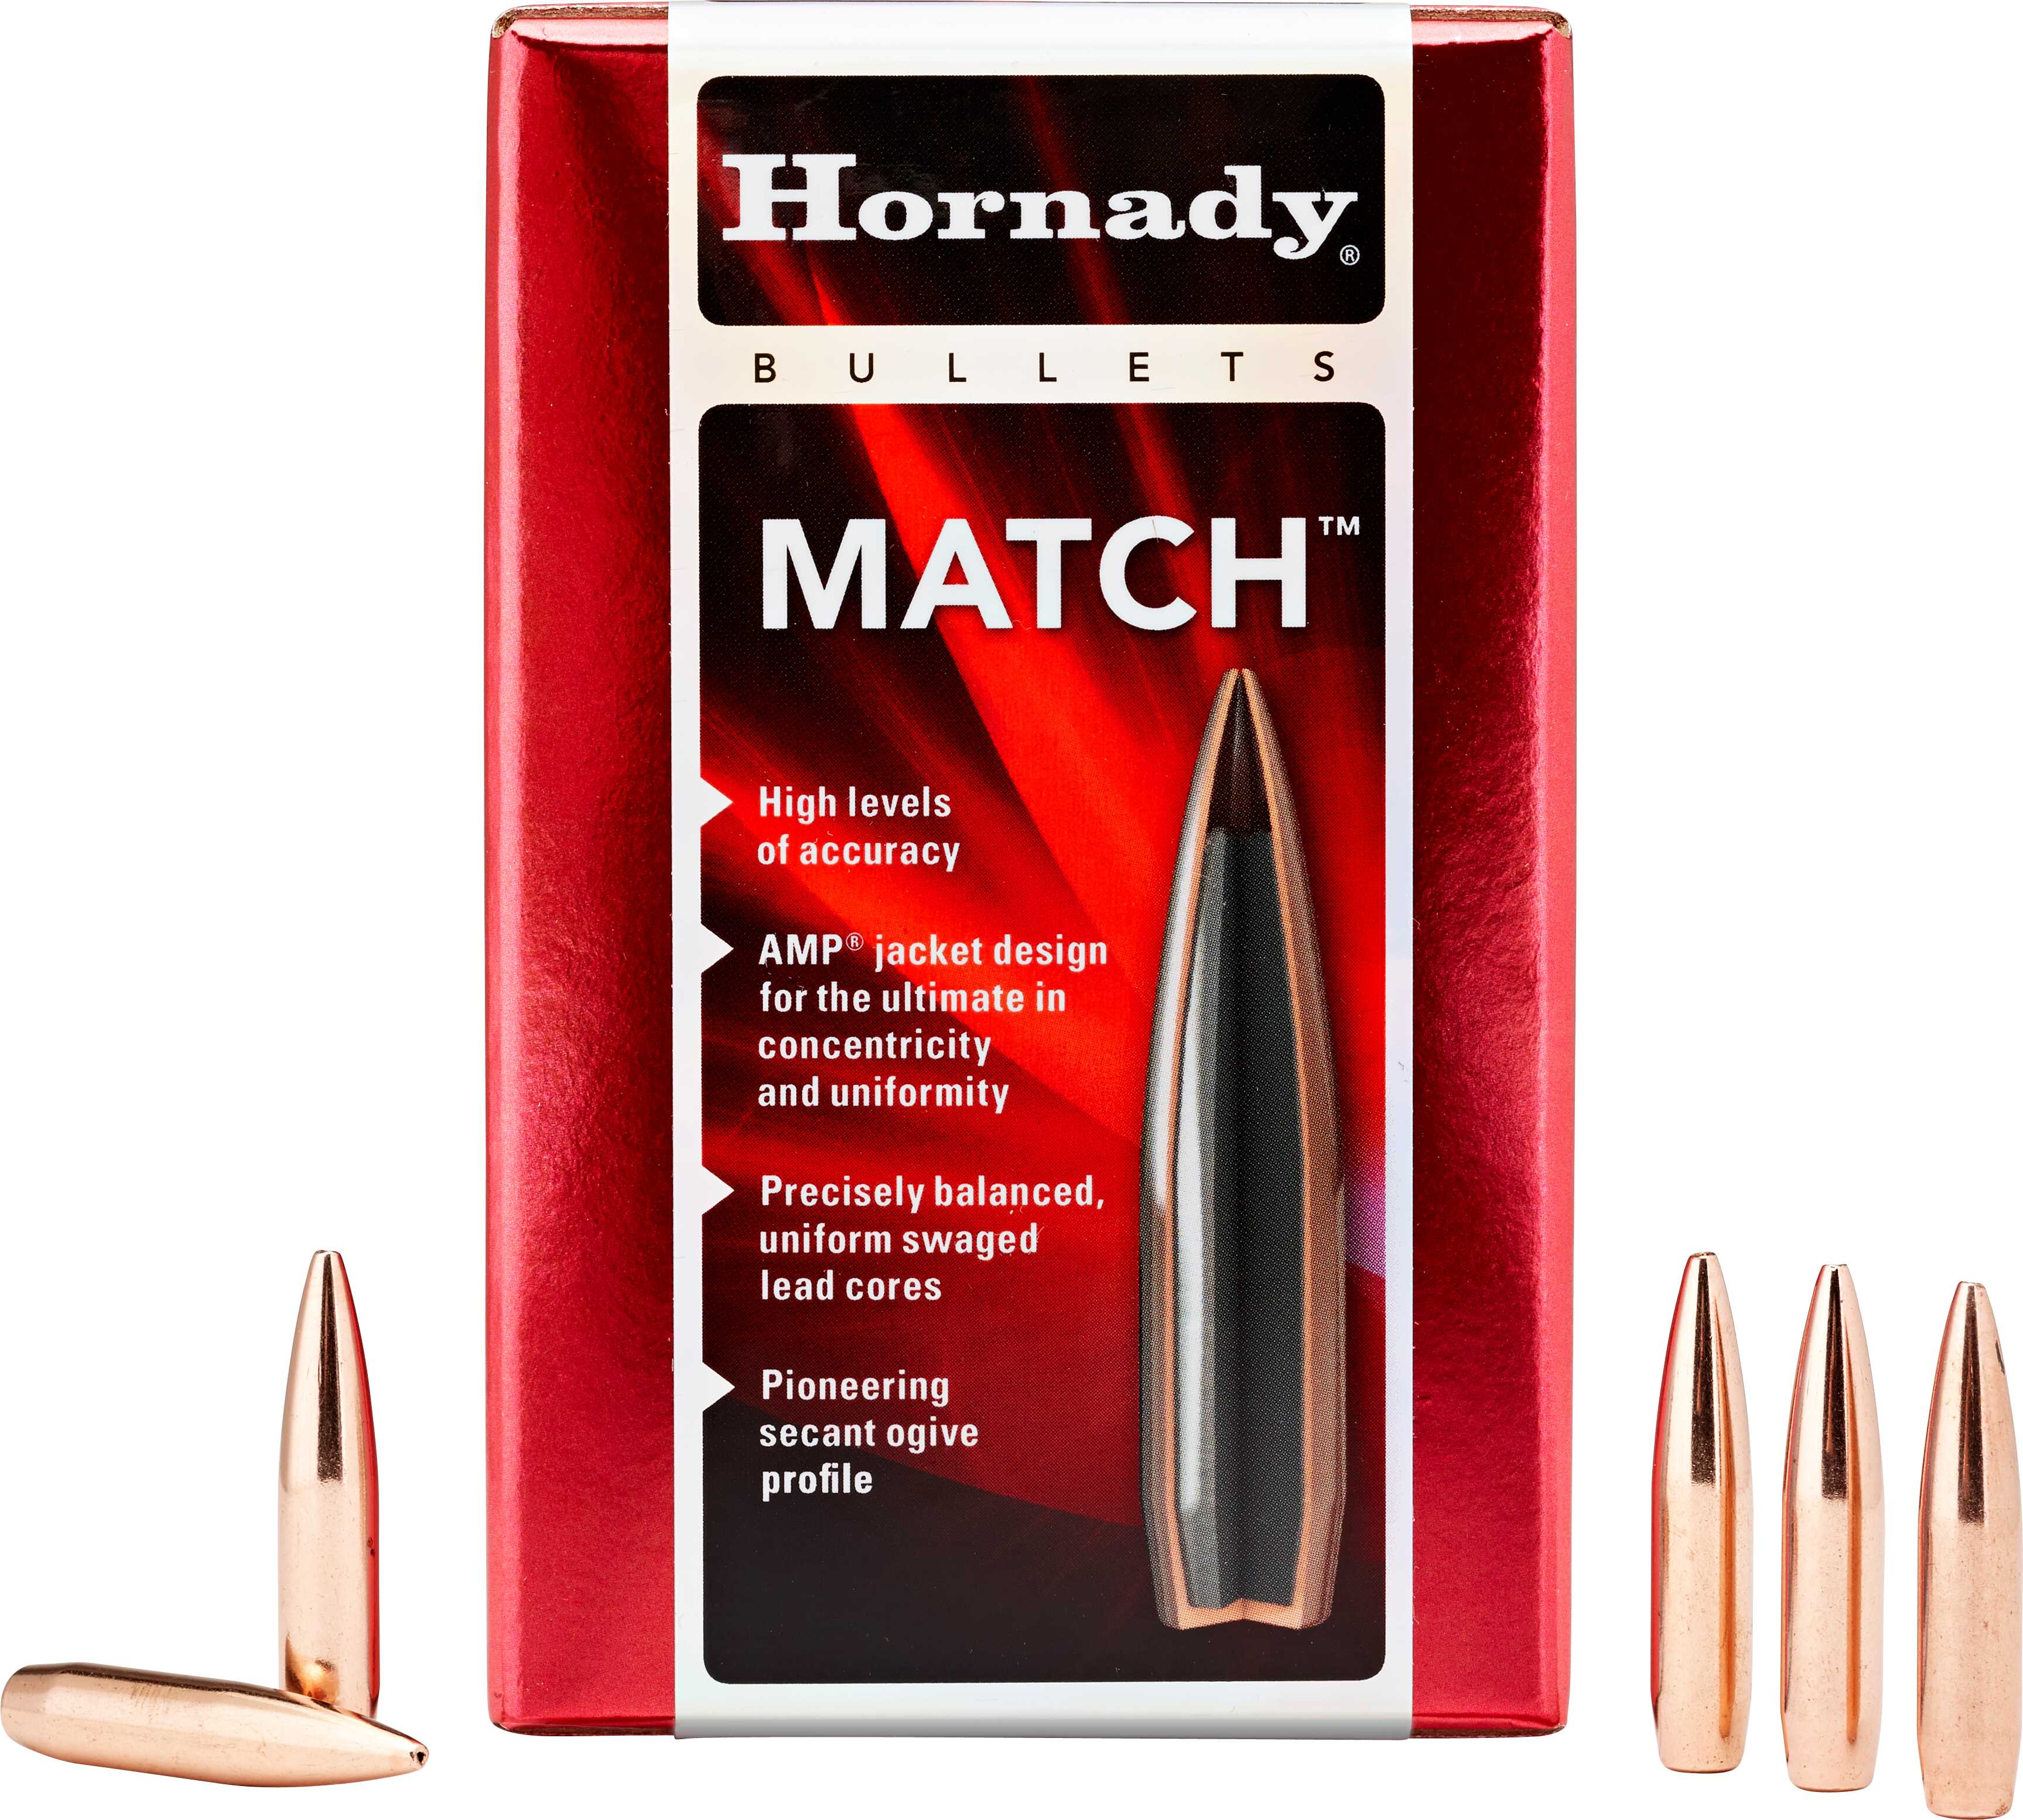 Hornady 2458 Match 6mm .243 105 GR Boat Tail Hollow Point 100 Box